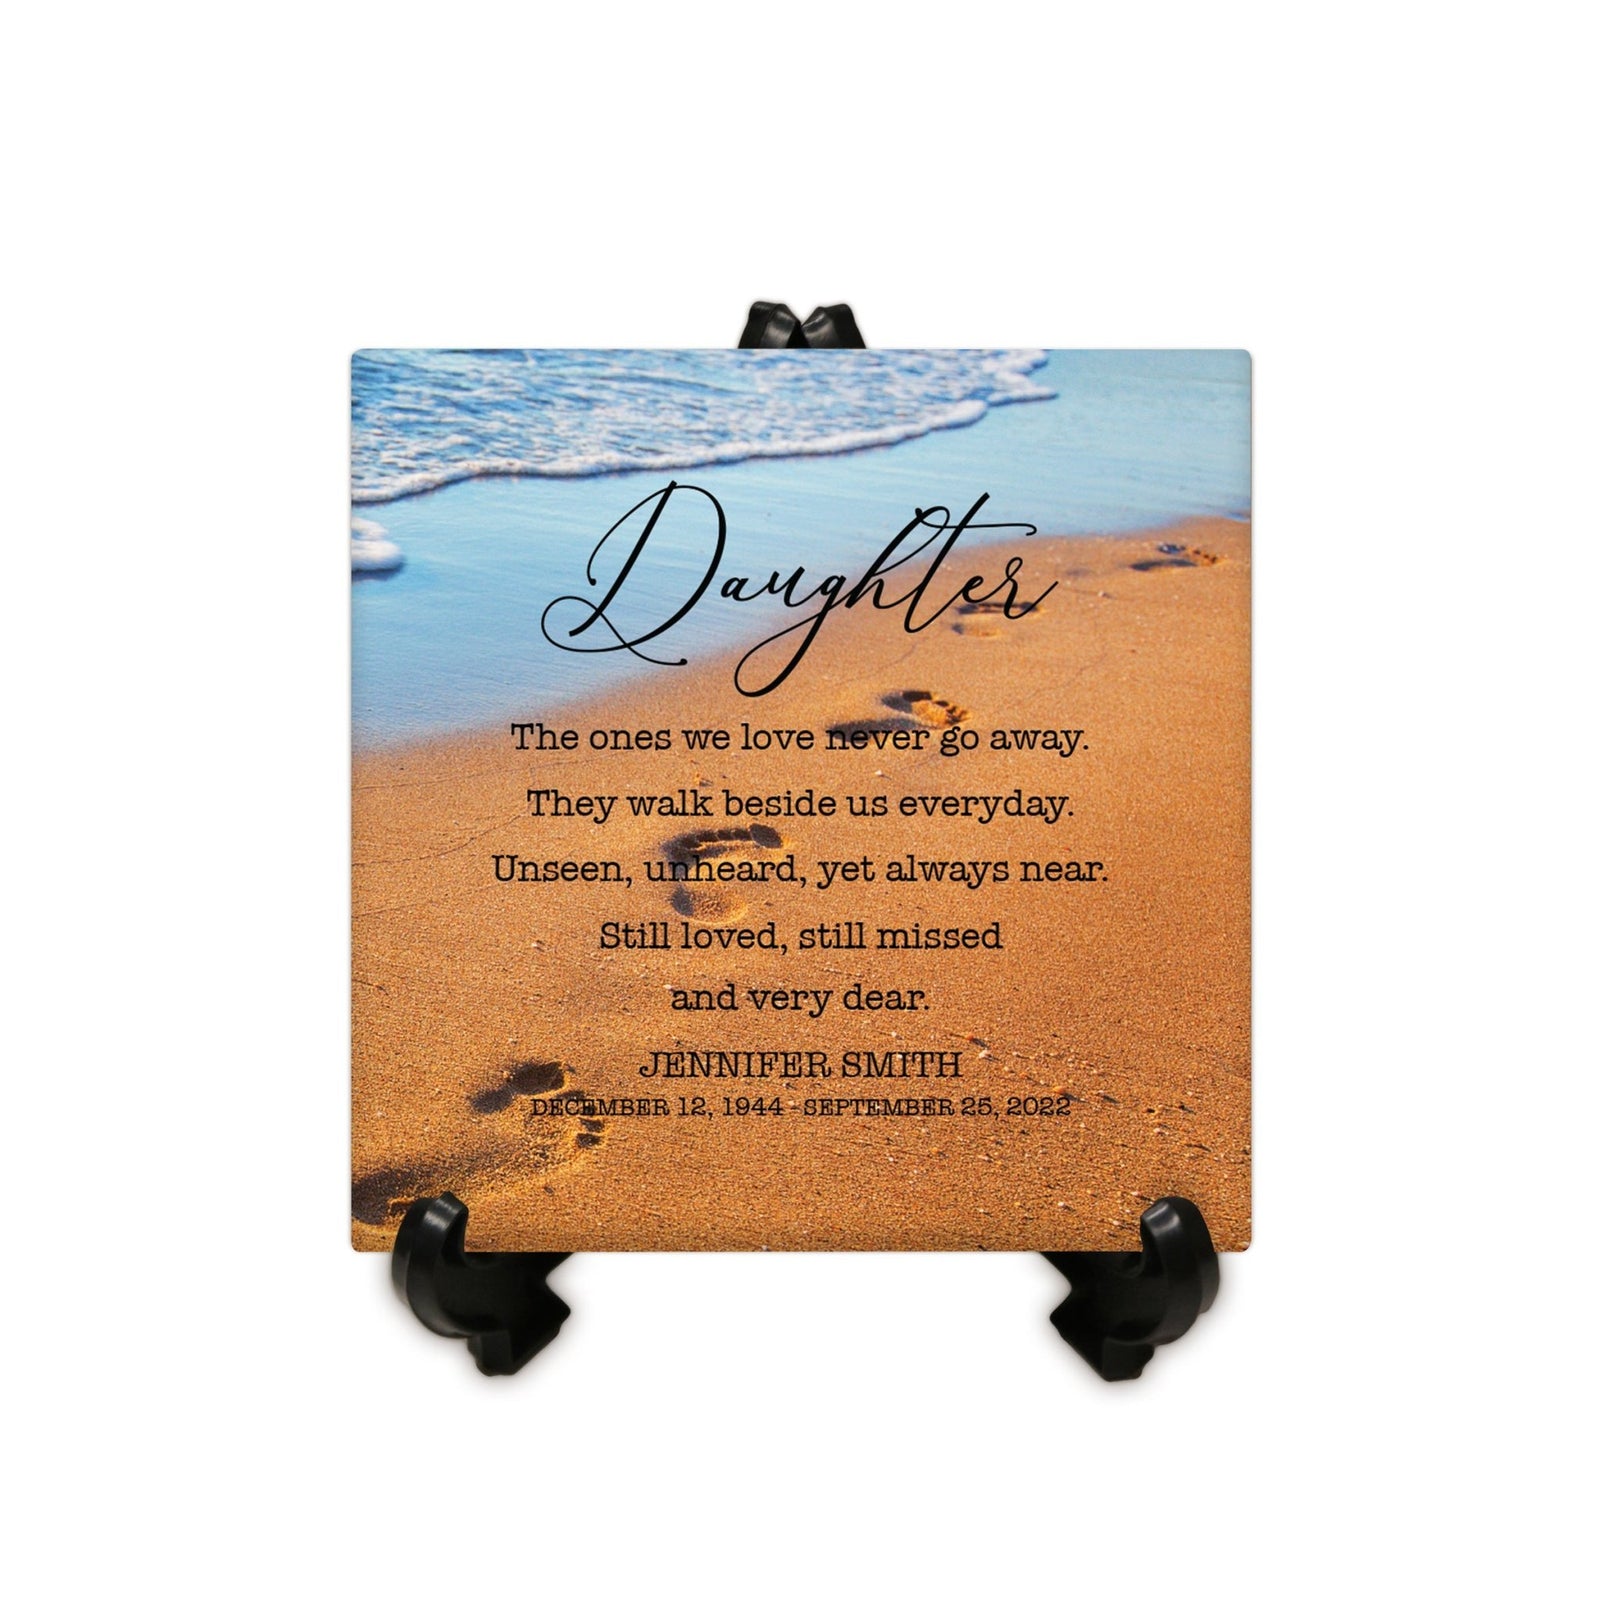 Personalized Memorial Ceramic Trivet with Stand for Home Decor - The Ones We Love - LifeSong Milestones